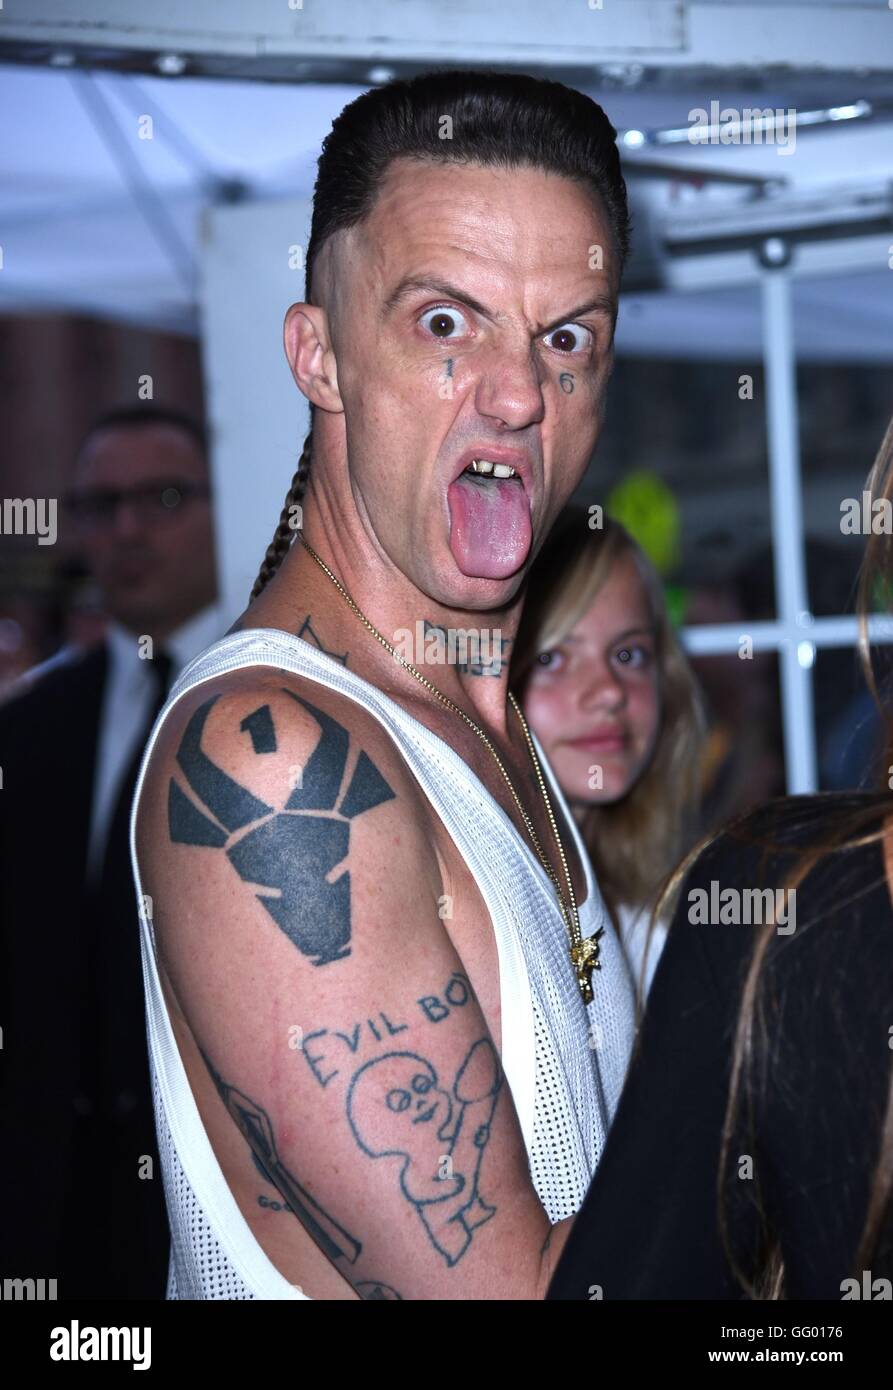 New York, NY, USA. 1st Aug, 2016. Ninja of Die Antwoord, Watkin Tudor Jones at arrivals for SUICIDE SQUAD Premiere, Beacon Theatre, New York, NY August 1, 2016. Credit:  Derek Storm/Everett Collection/Alamy Live News Stock Photo